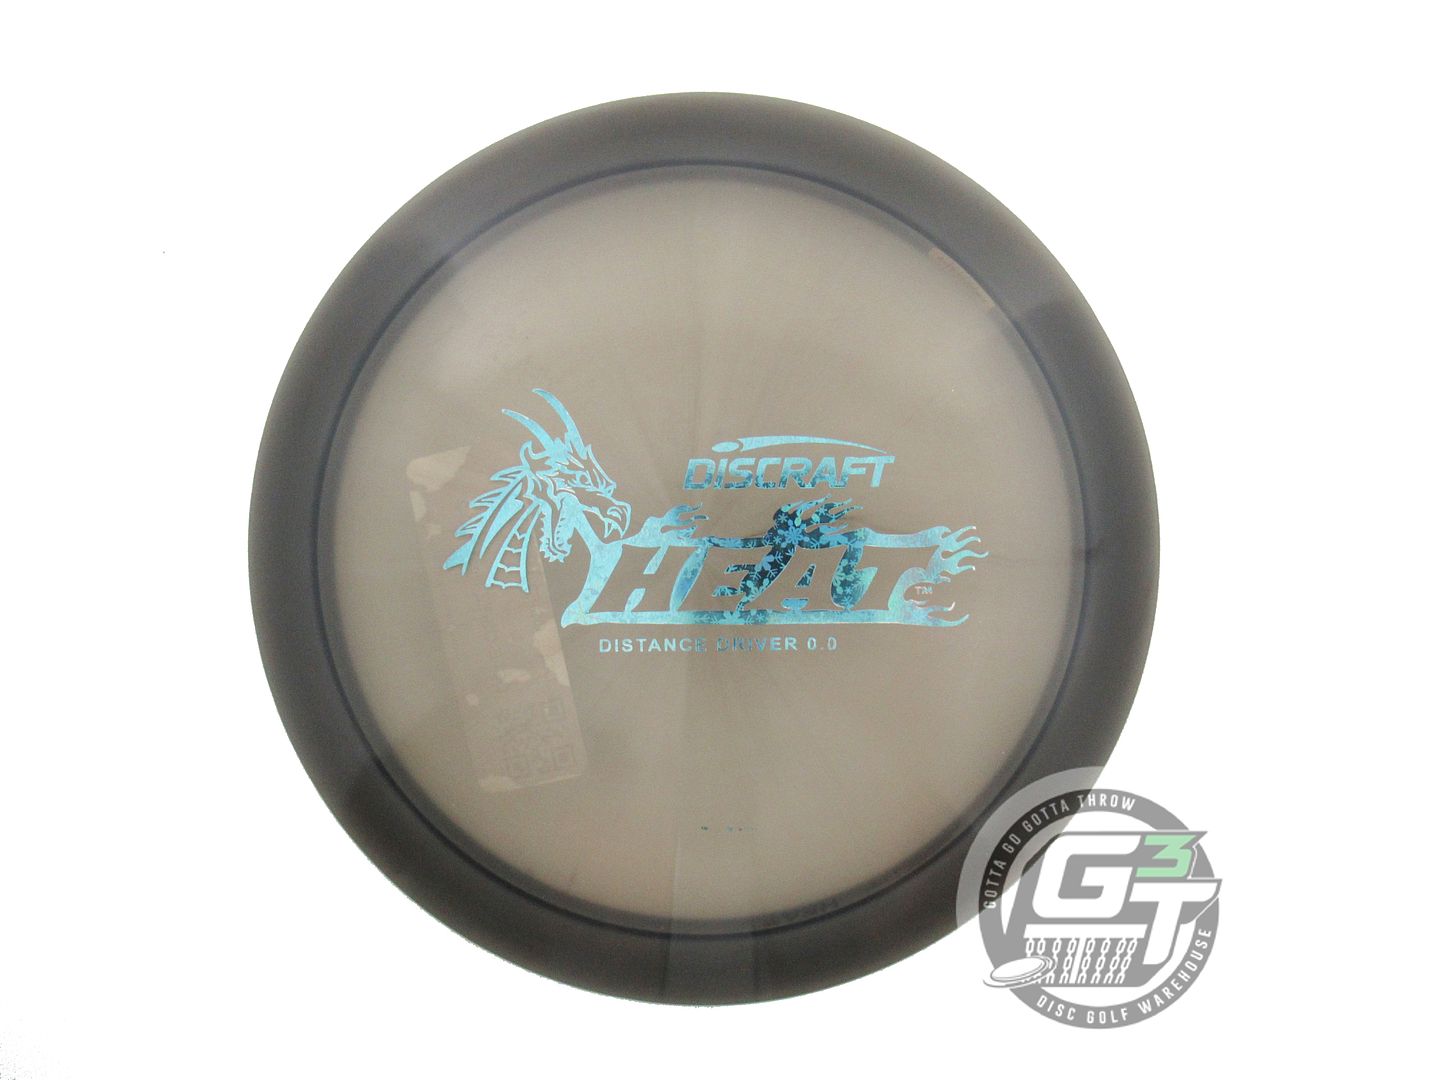 Discraft Limited Edition Old School Pro D Stamp Elite Z Heat Distance Driver Golf Disc (Individually Listed)